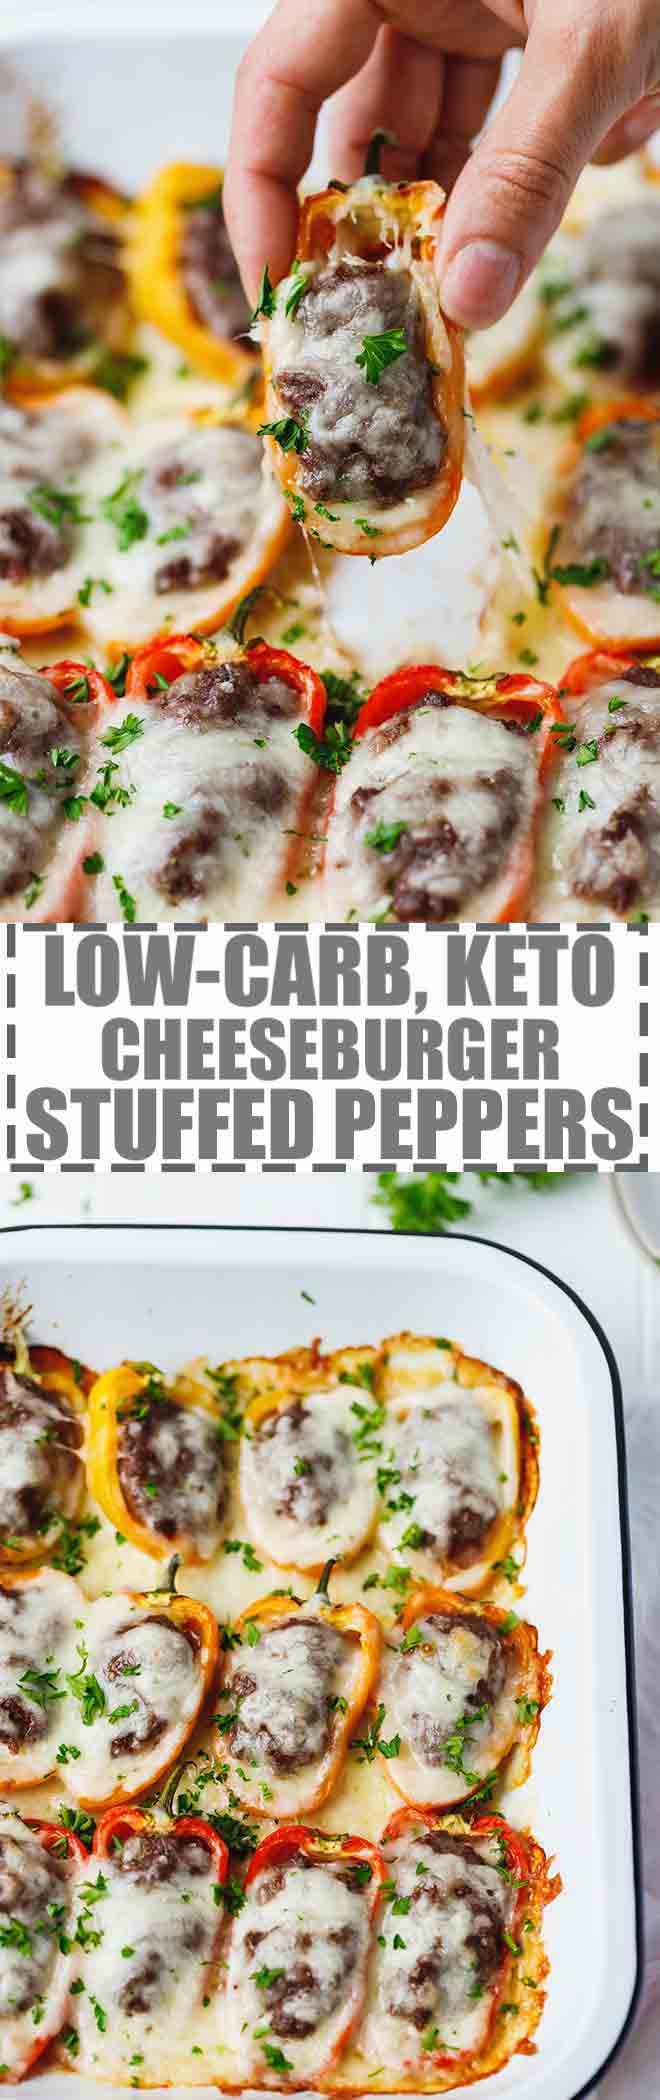 Low Carb Stuffed Peppers Recipe With Ground Beef
 Low Carb Keto Cheeseburger Stuffed Peppers Recipe